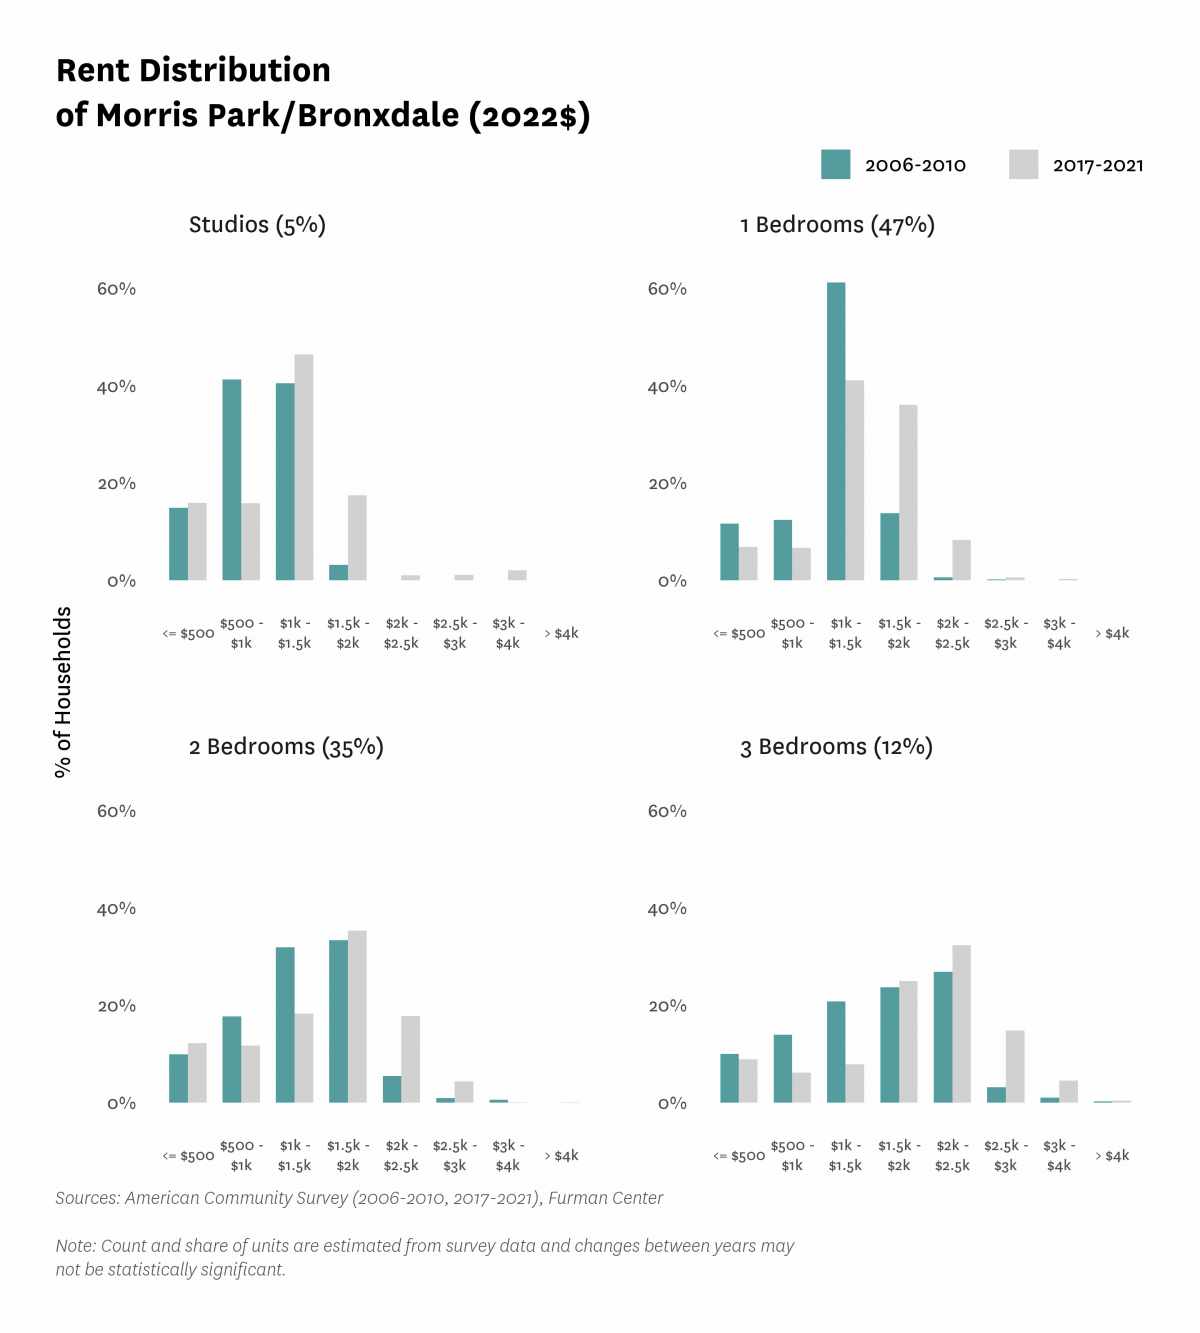 Graph showing the distribution of rents in Morris Park/Bronxdale in both 2010 and 2017-2021.